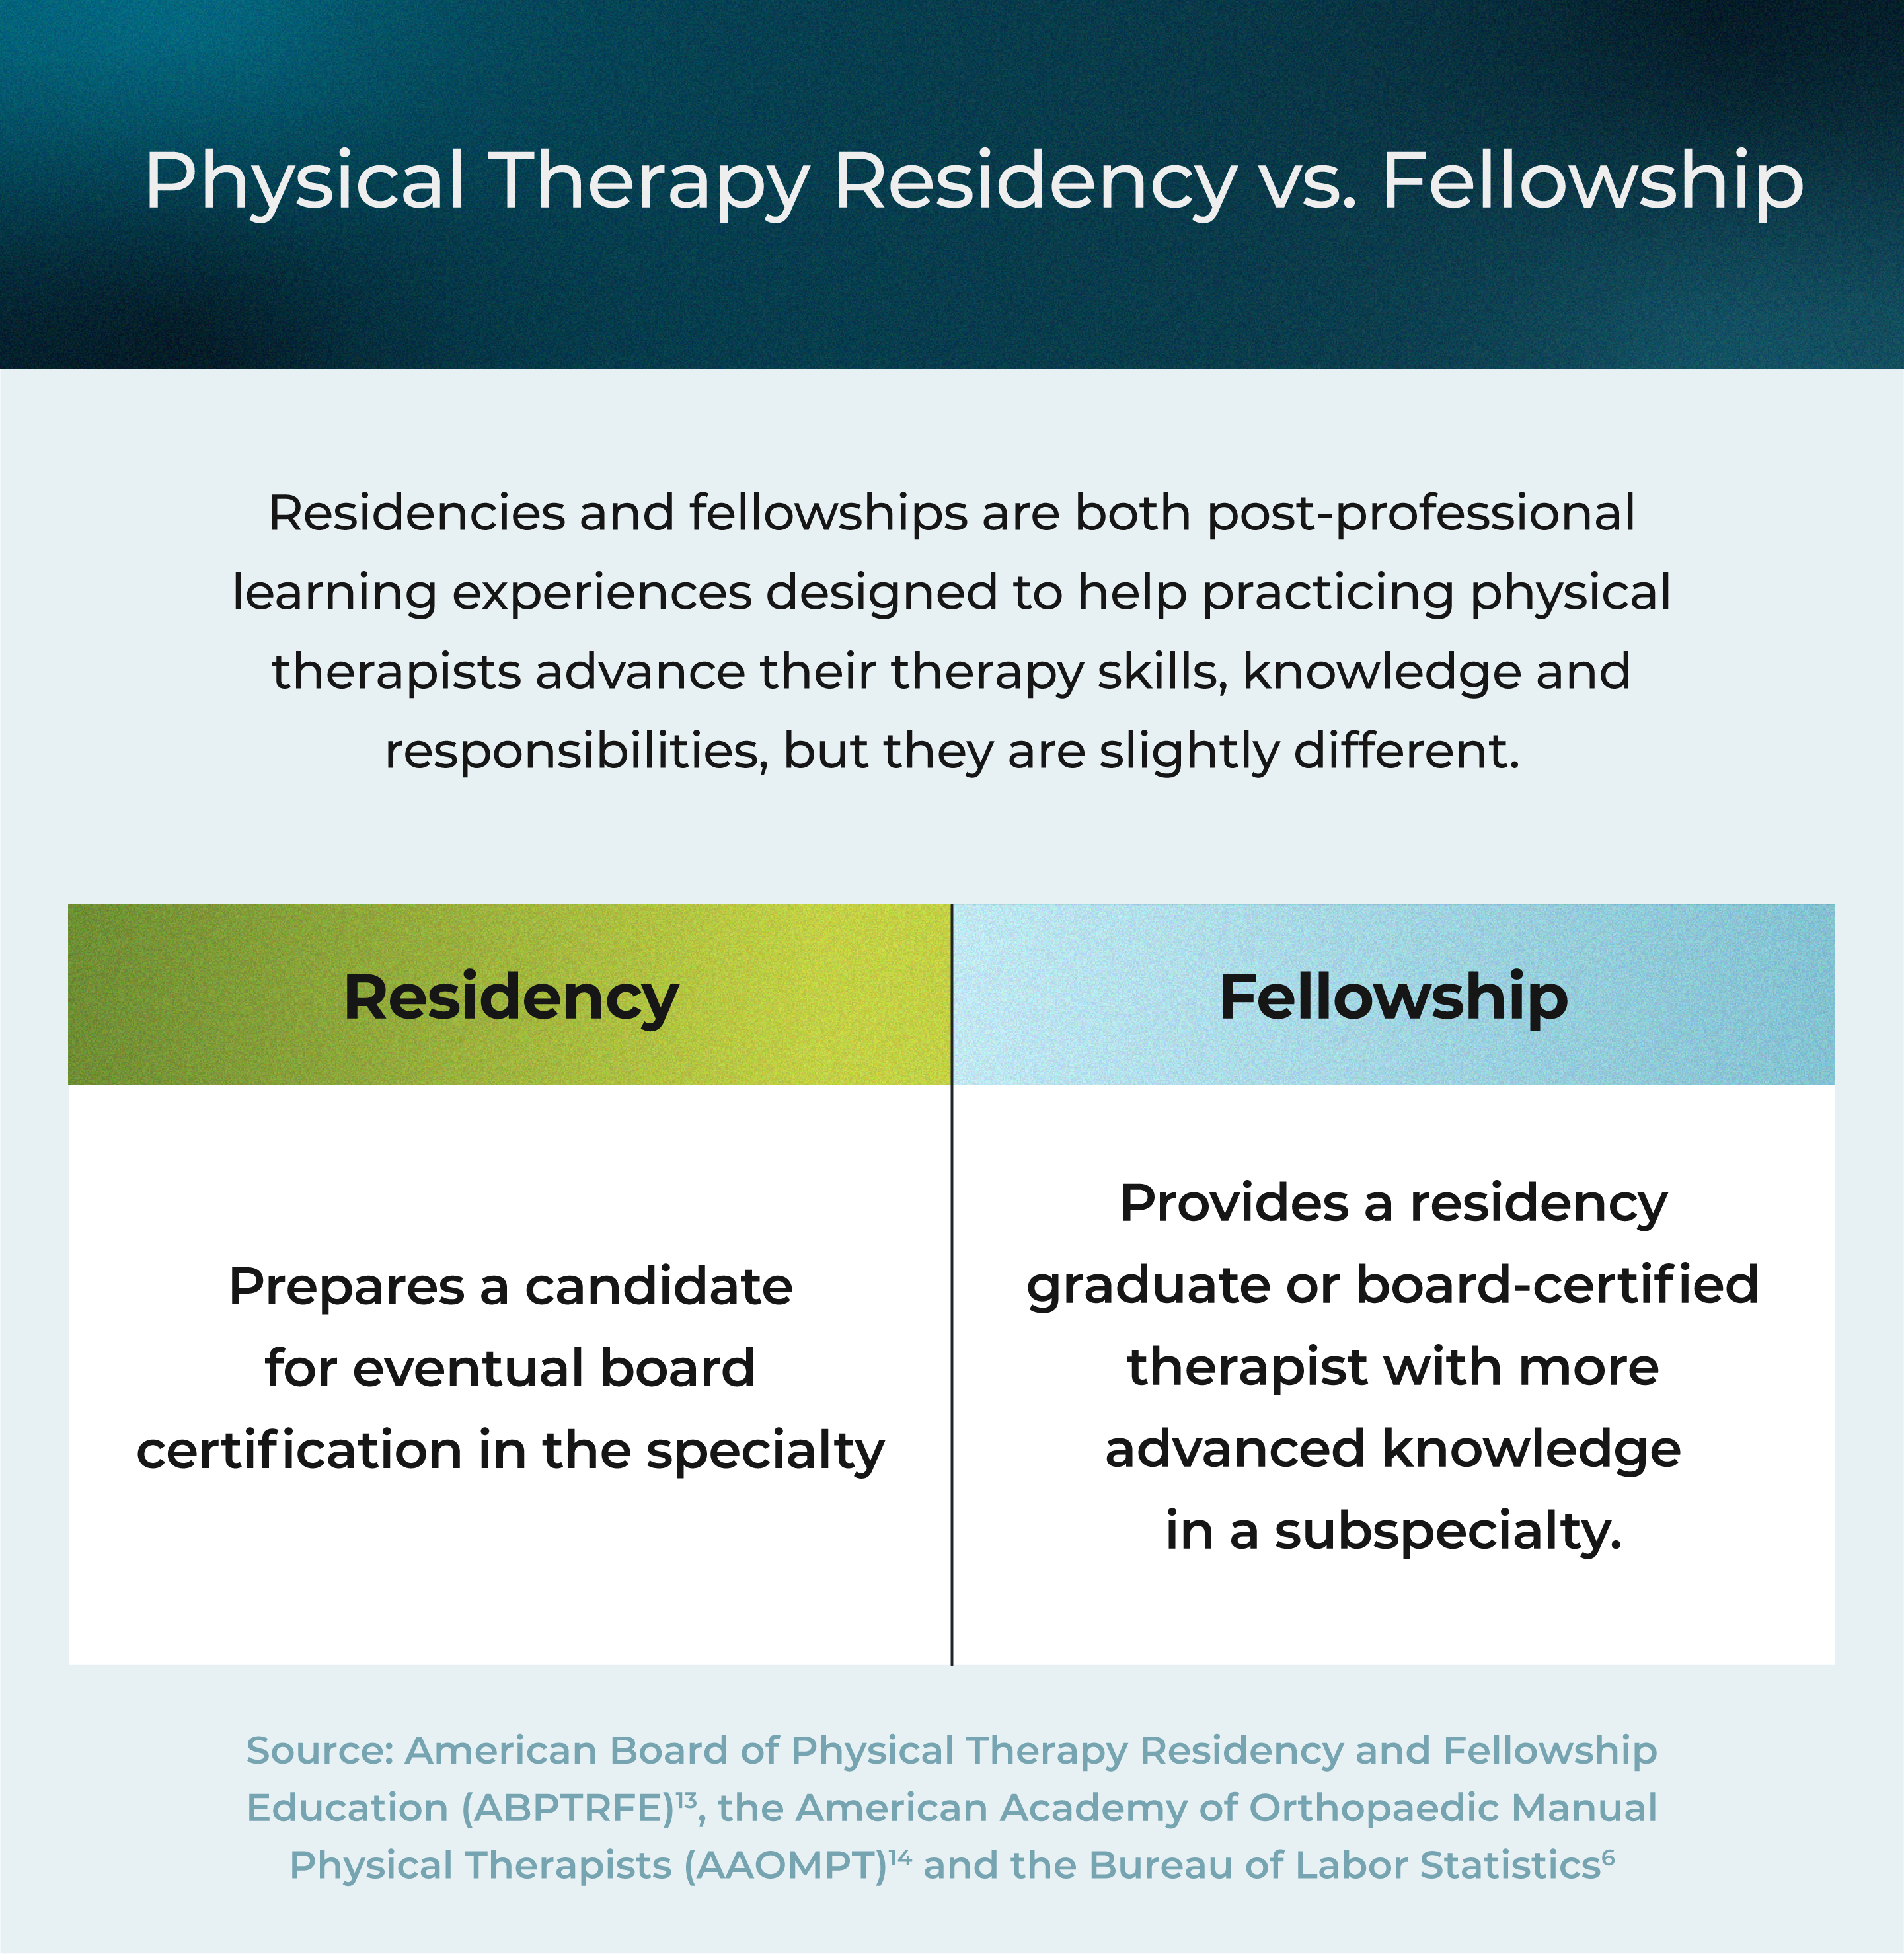 The differences between physical therapy residencies and fellowships.